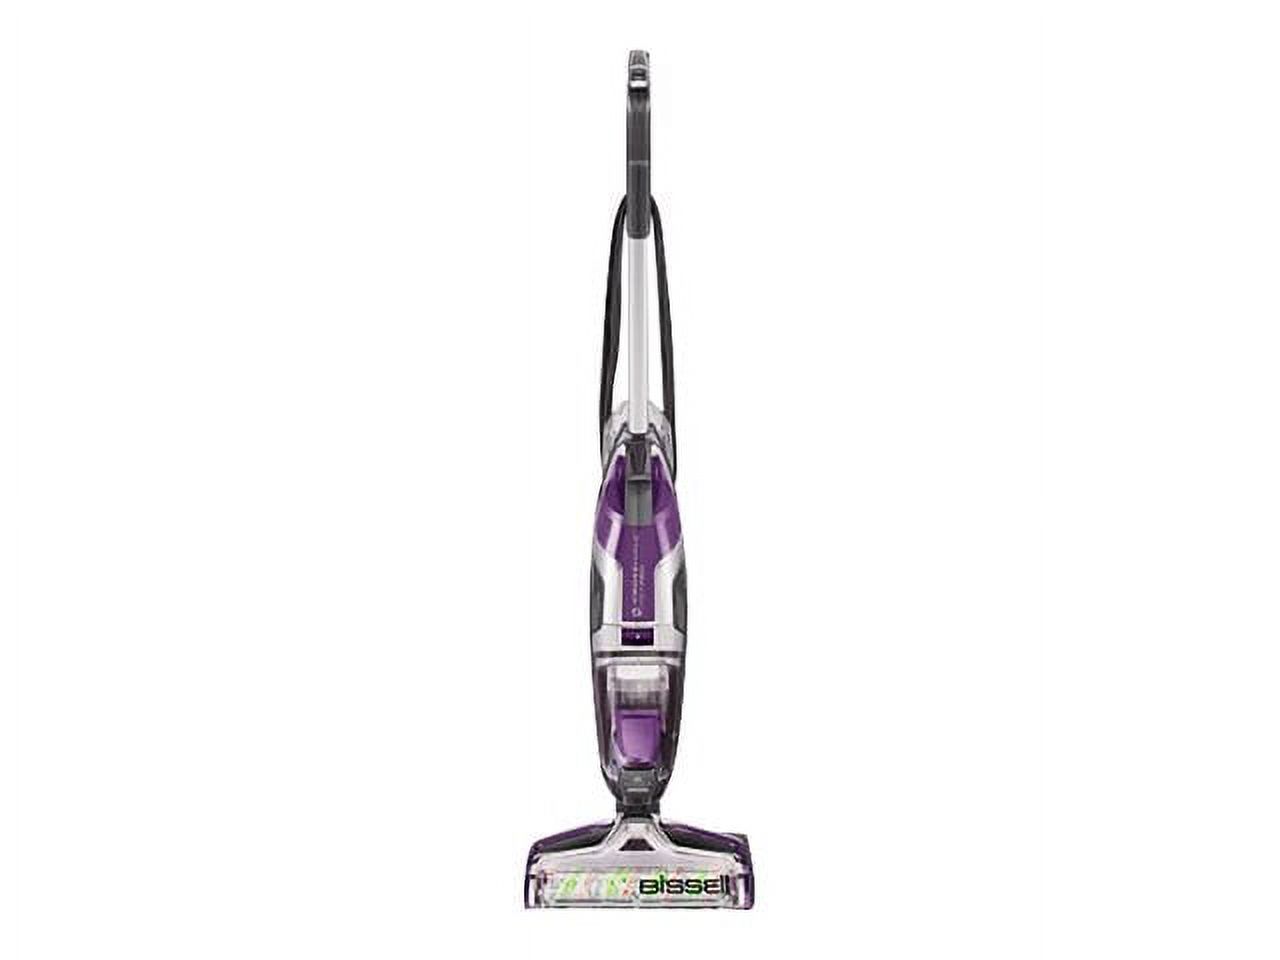 BISSELL Crosswave Pet Pro Wet Dry Vacuum, 2306A - image 5 of 6